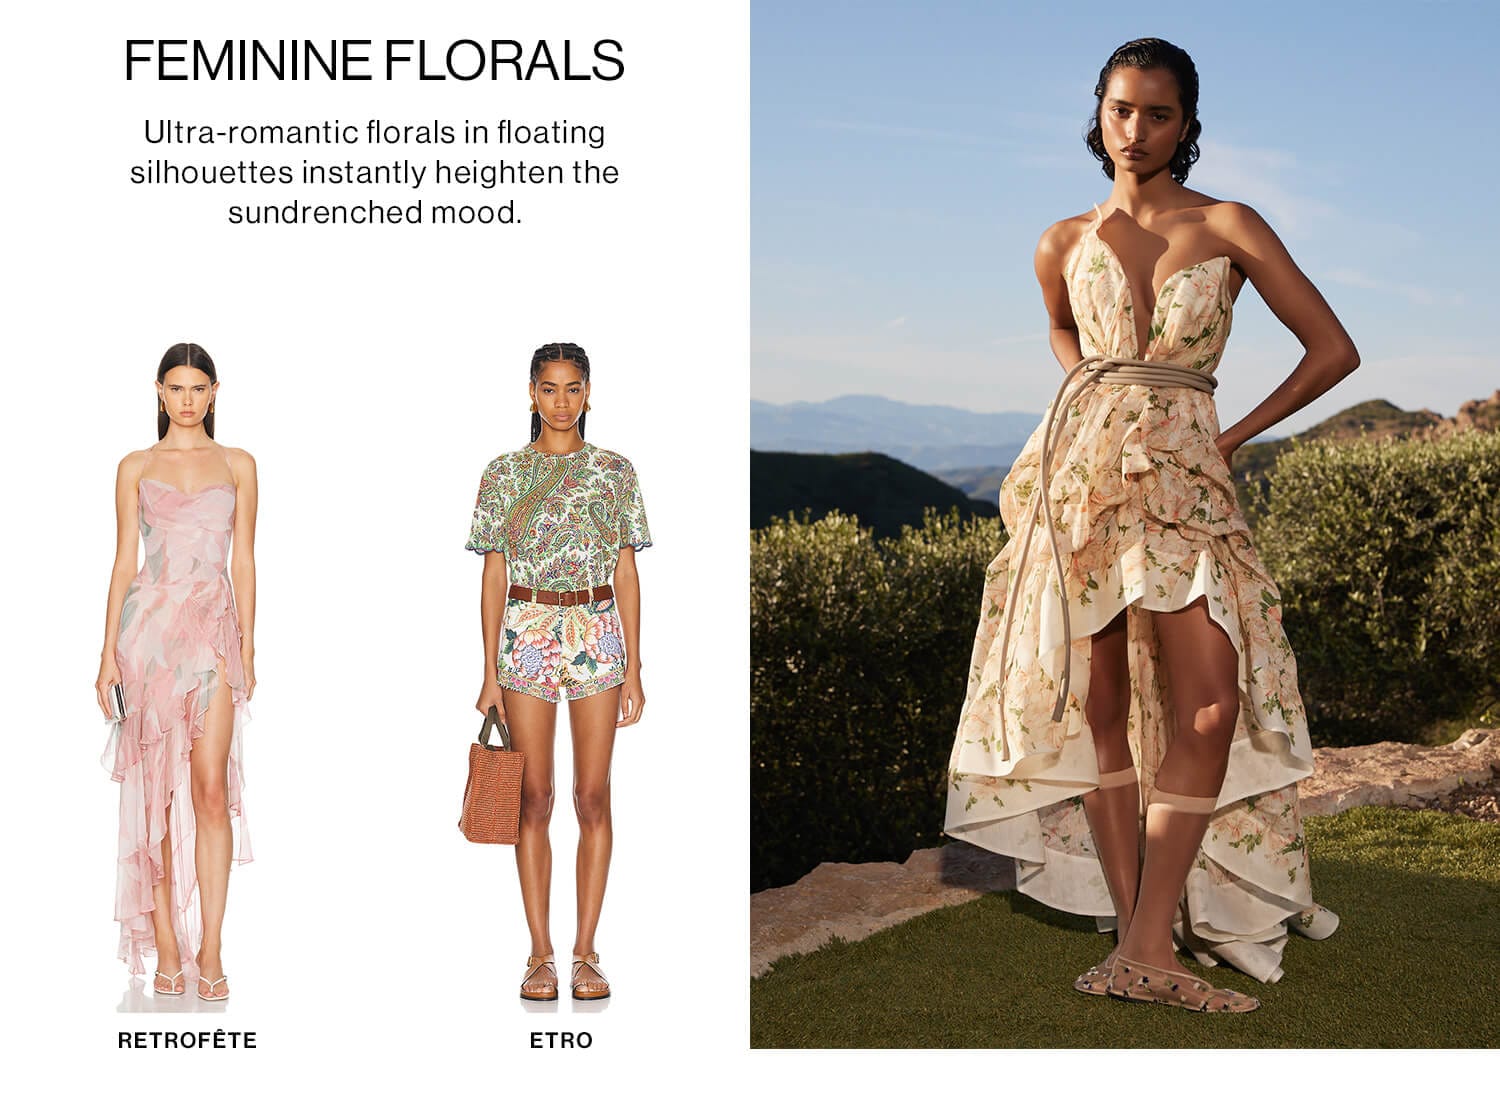 FEMININE FLORALS DEK: Ultra-romantic florals in floating silhouettes instantly heighten the sundrenched mood.